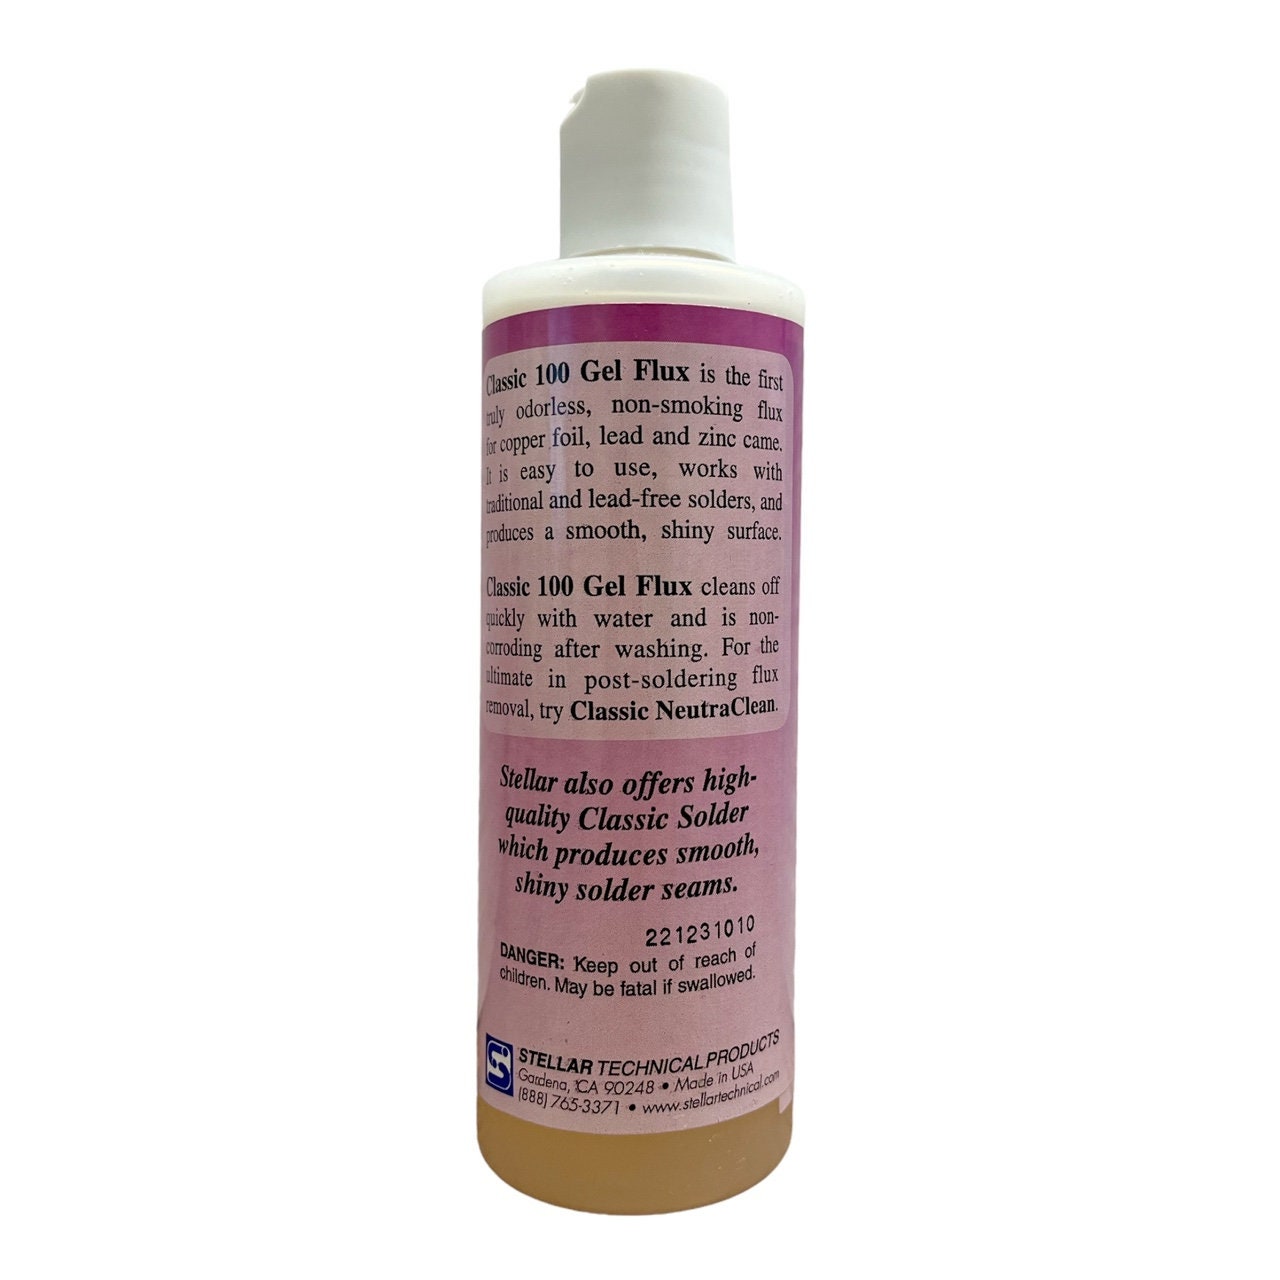 High-Quality 8oz Liquid Zinc Flux for Stained Glass, Soldering Work, and  Glass Repair - Made in USA